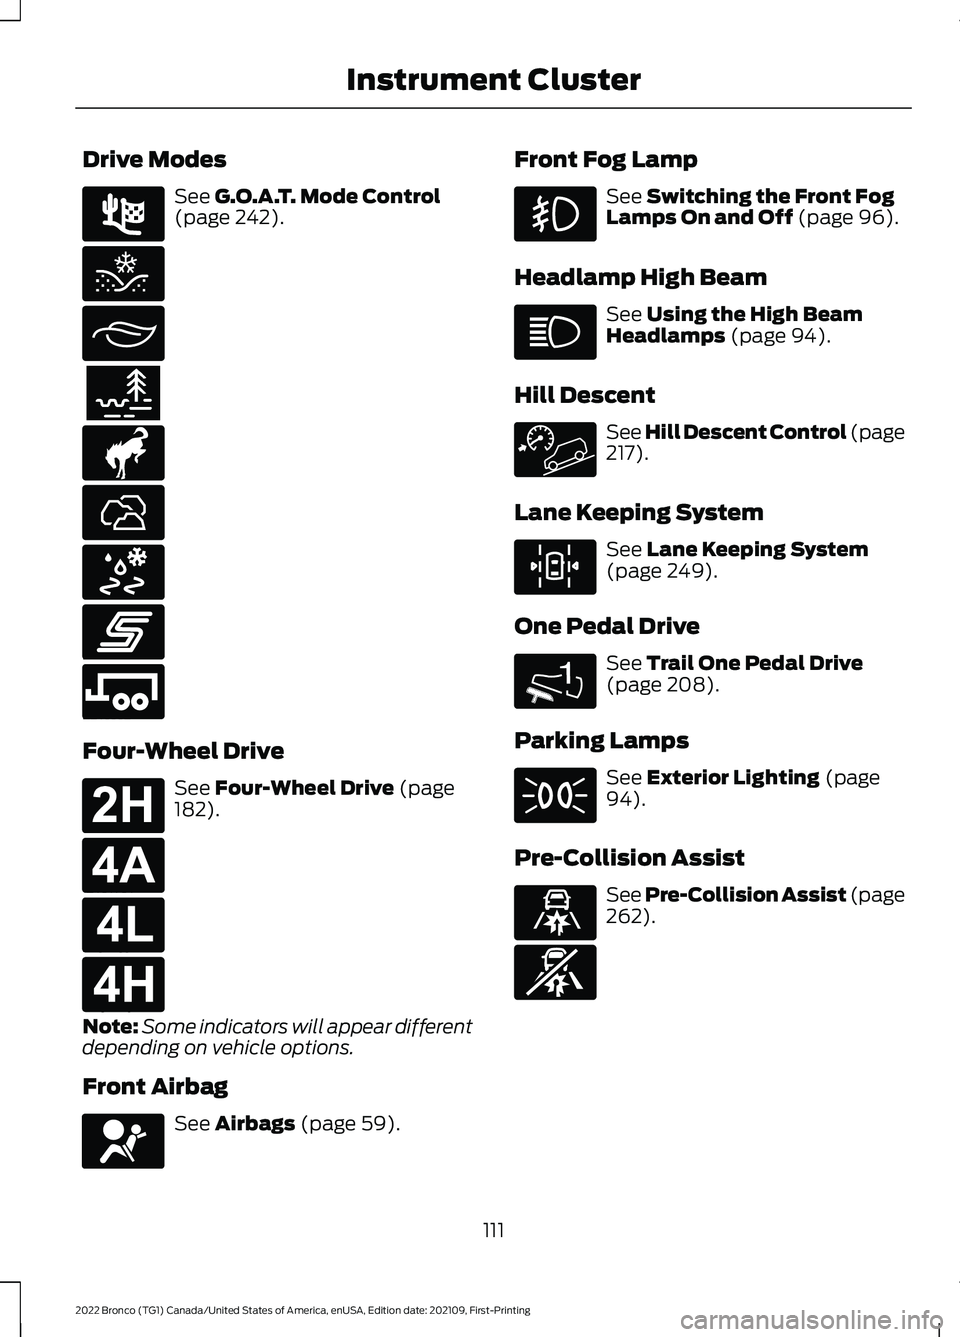 FORD BRONCO 2022  Owners Manual Drive Modes
See G.O.A.T. Mode Control(page 242).
Four-Wheel Drive
See Four-Wheel Drive (page182).
Note:Some indicators will appear differentdepending on vehicle options.
Front Airbag
See Airbags (page